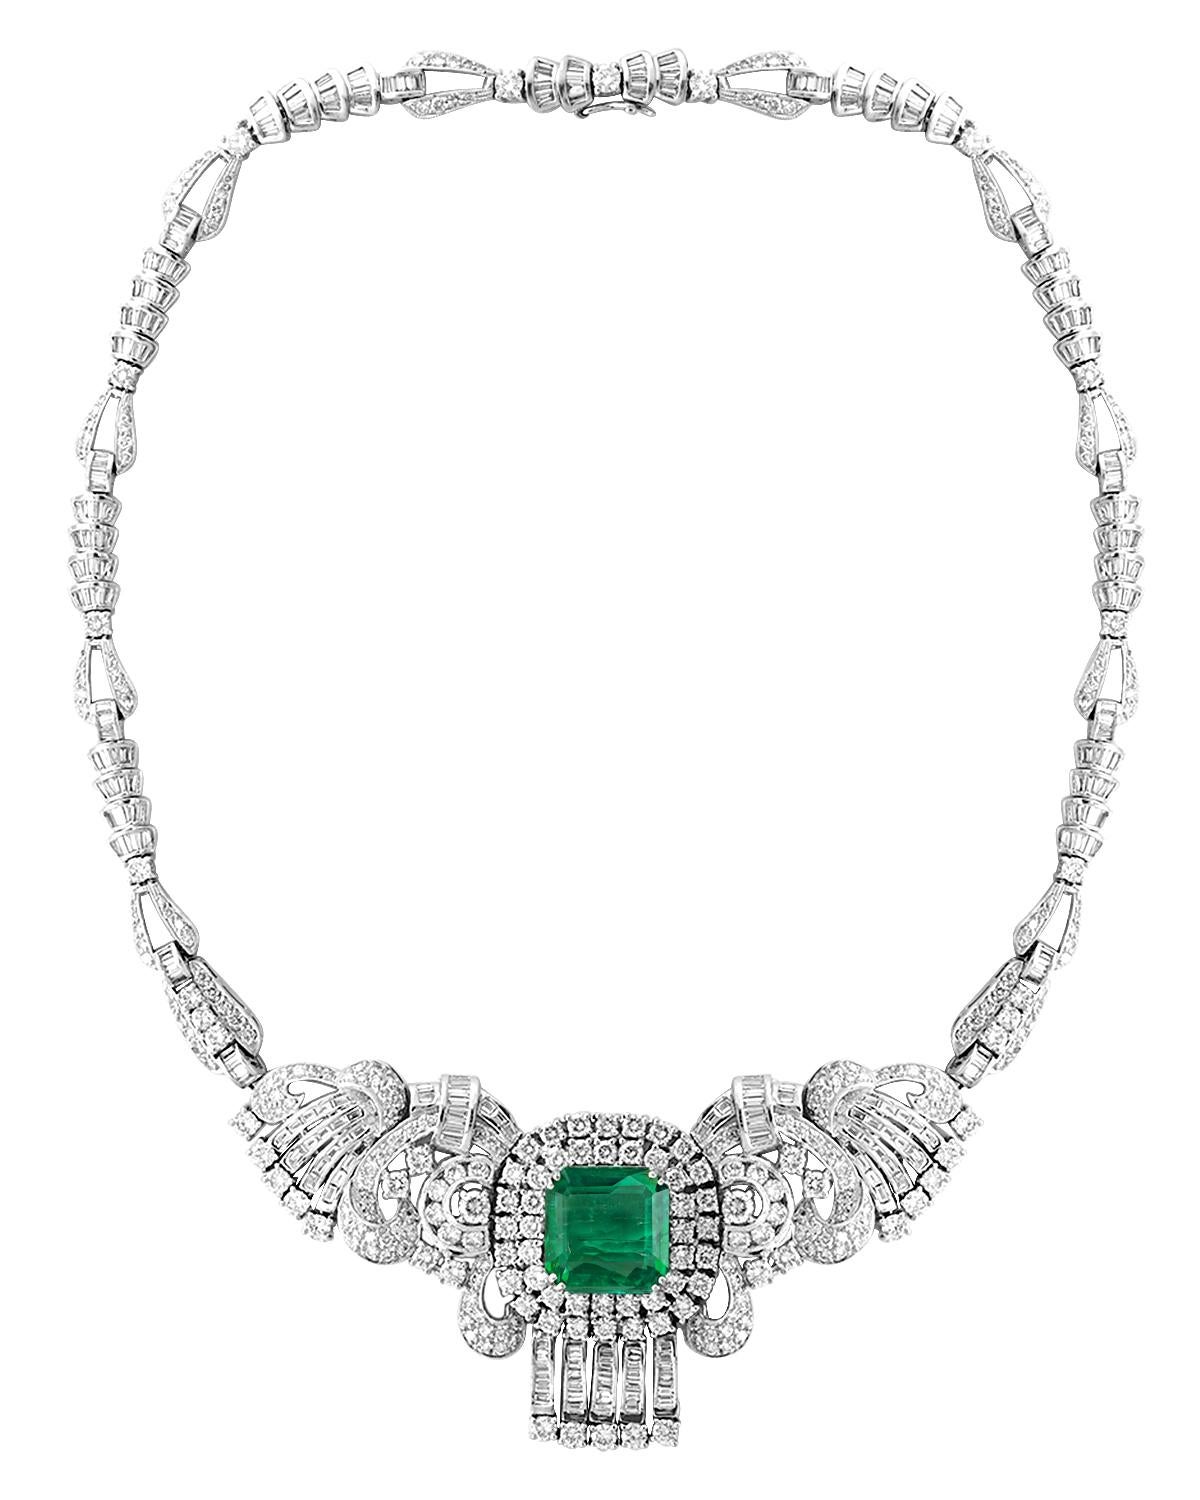 Platinum Colombian  Emerald and diamond  necklace, consisting of one large  approximately 16 Carat Emerald cut Colombian Emerald  with  round brilliant cut diamonds surrounding it .
The Necklace is made with  Buggetts and round diamonds . All prong